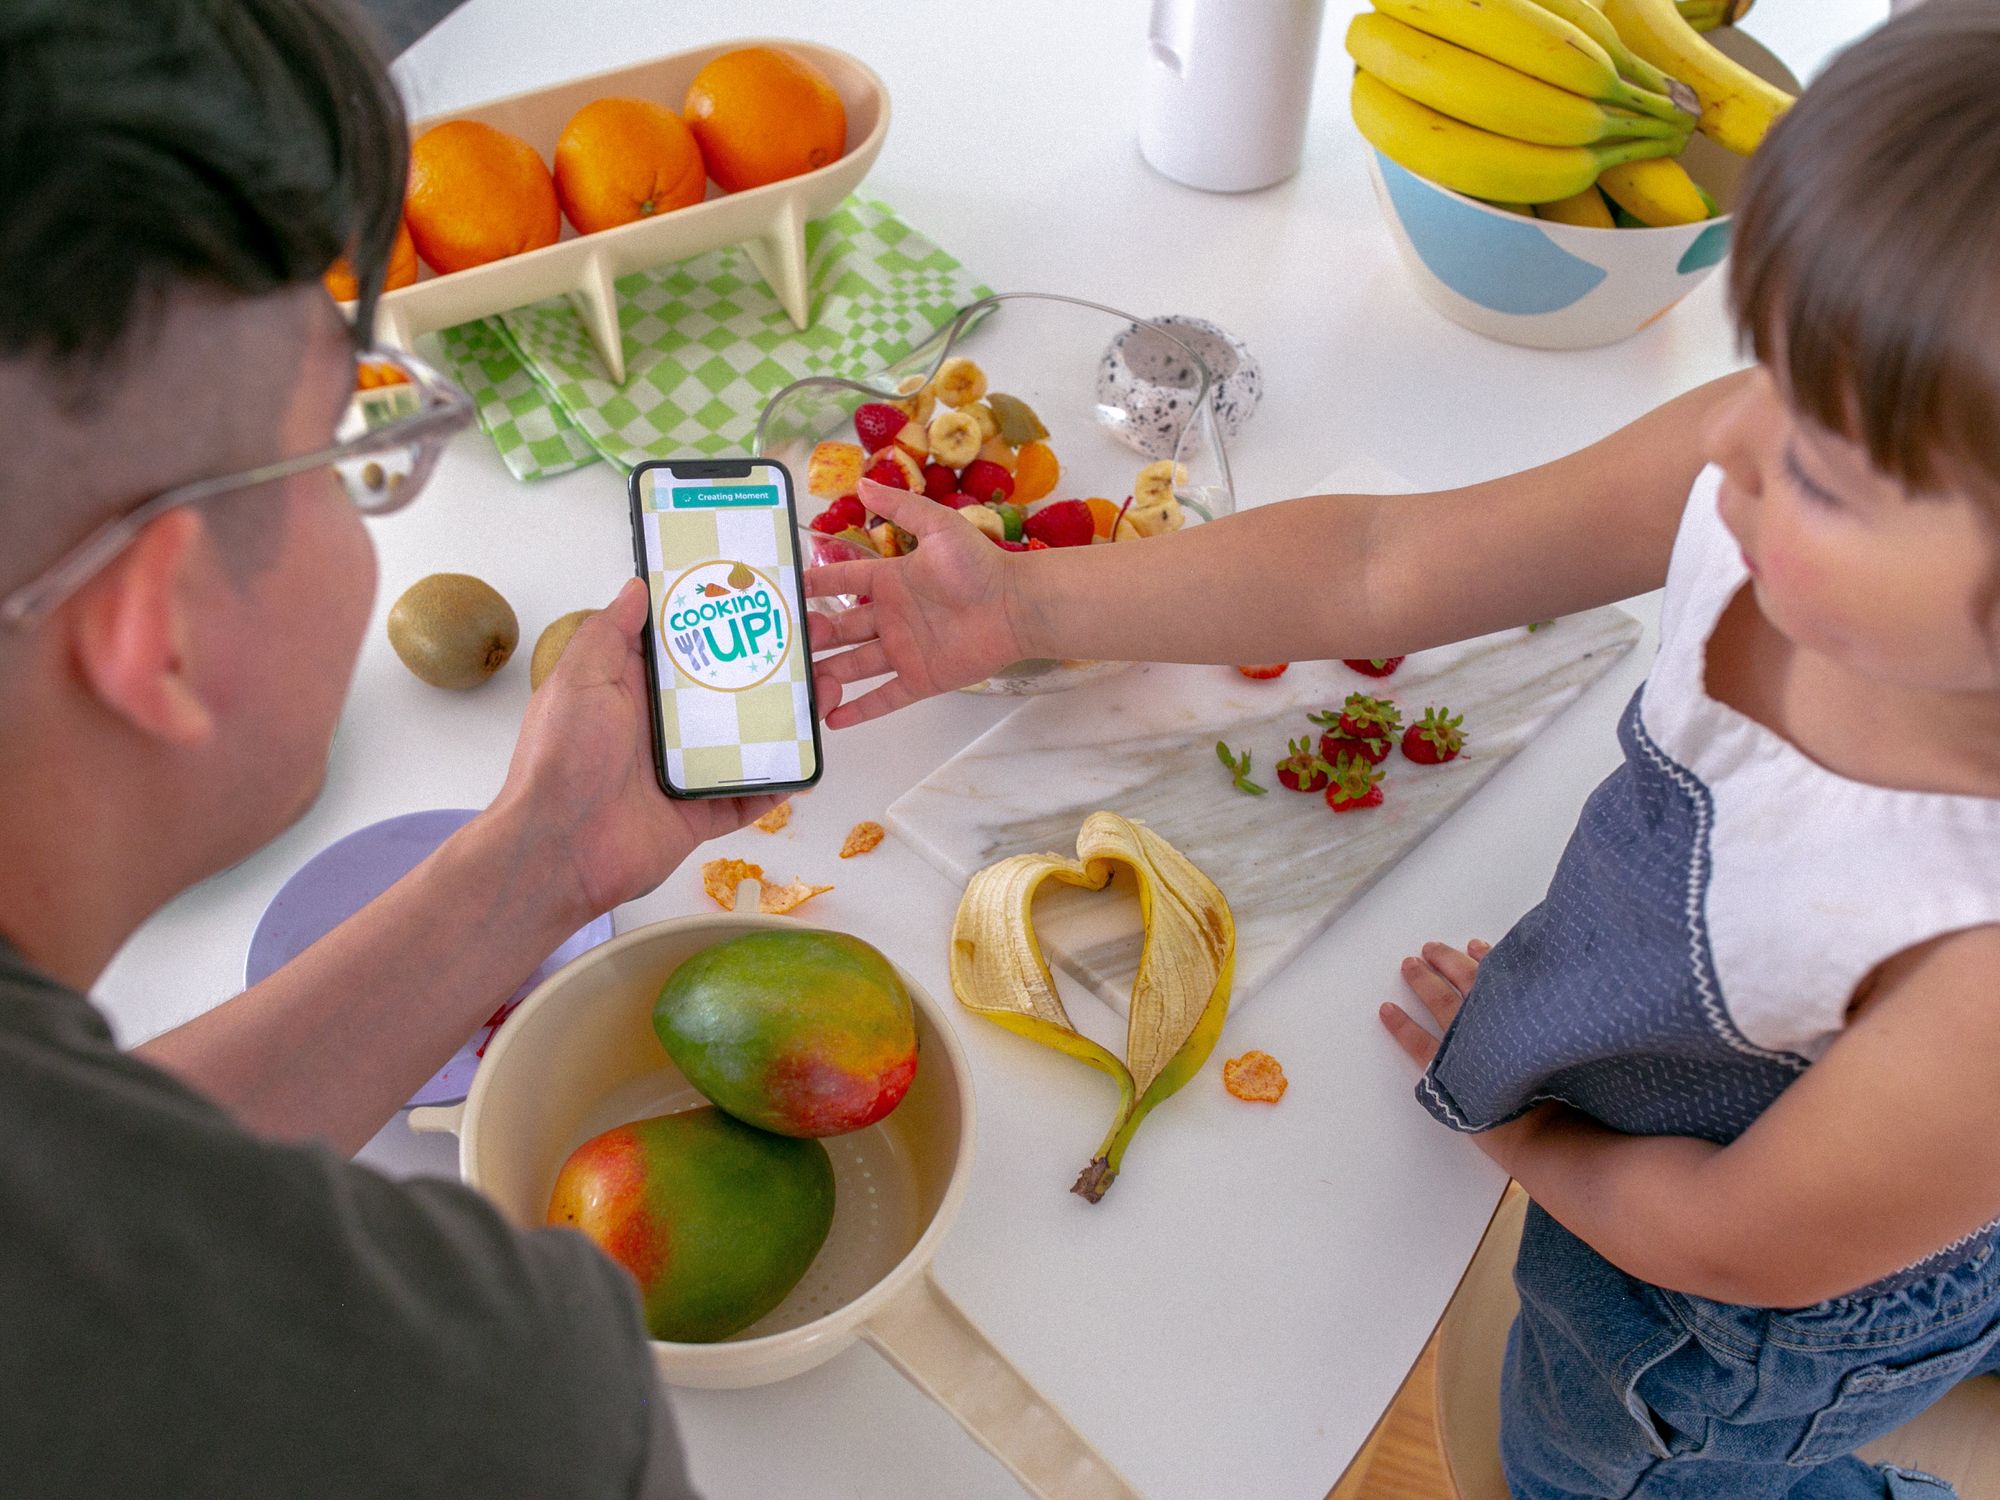 More Screen Time? OK Play Says It's a Kids App Parents Won't Feel Guilty About